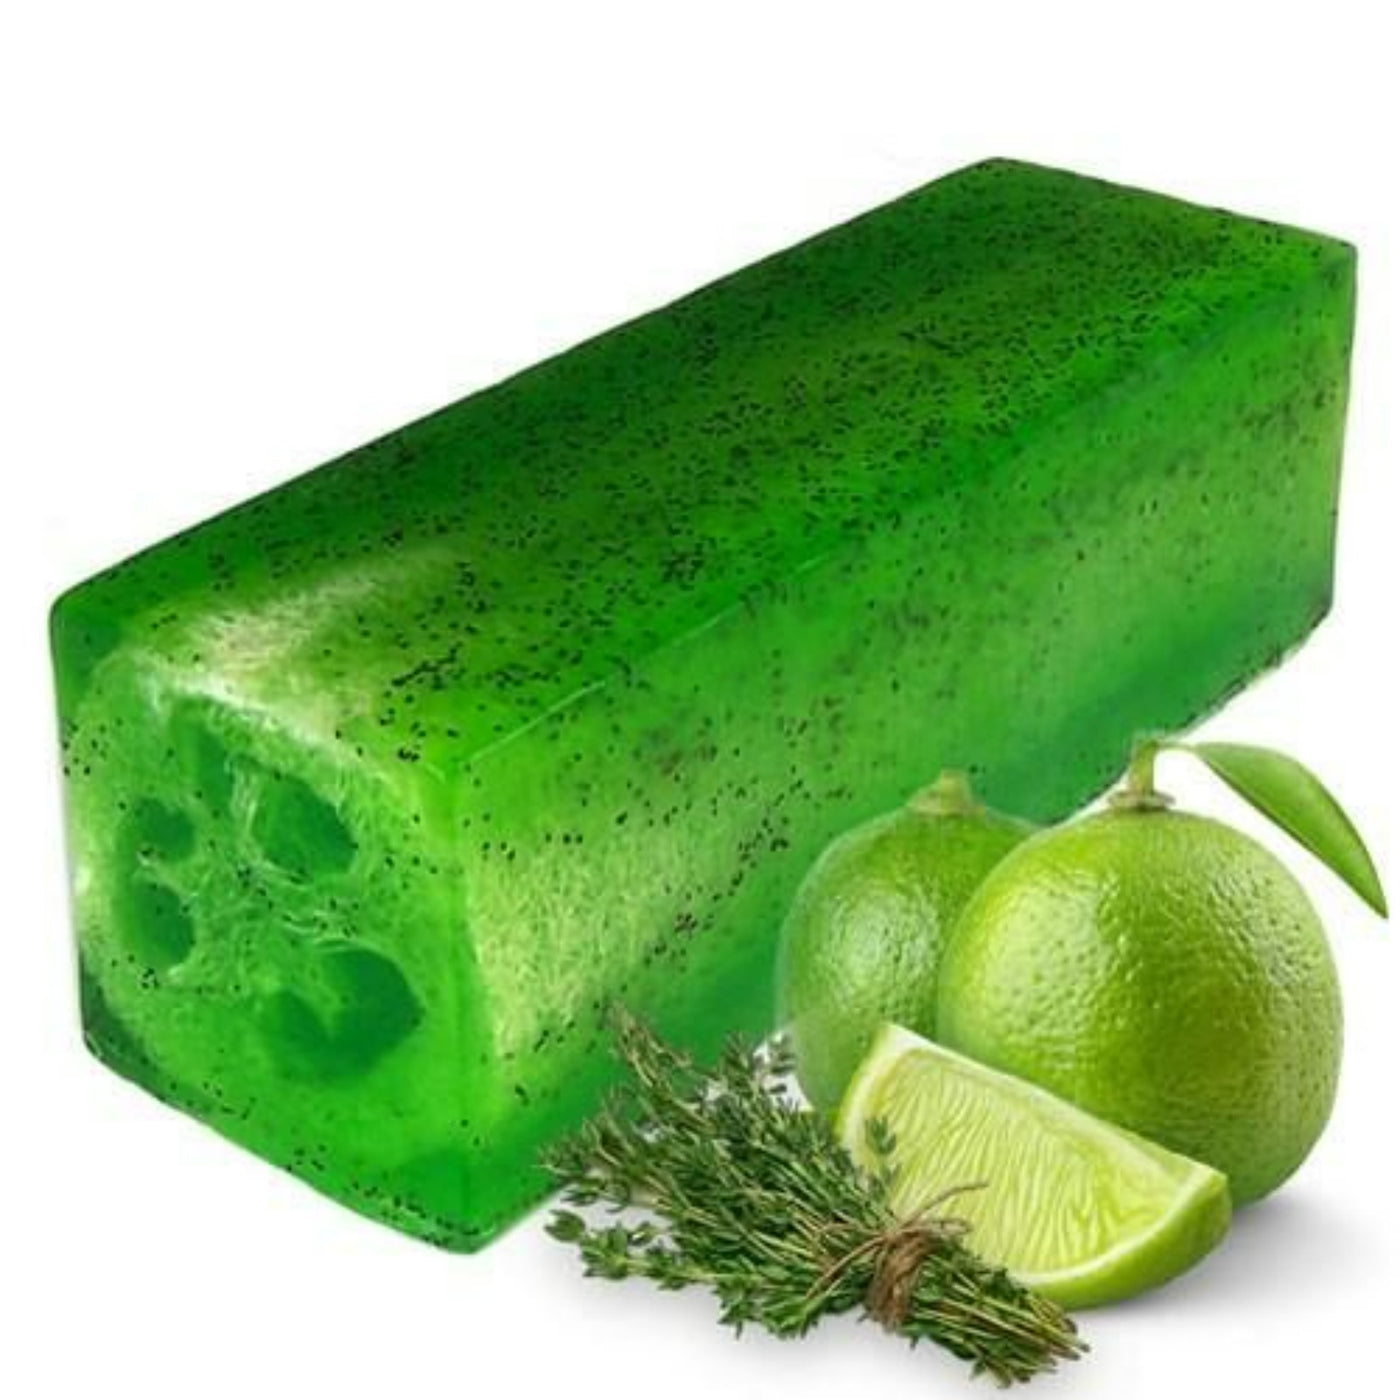 Loofah Soap Loaf - Zesty Lime & Thyme